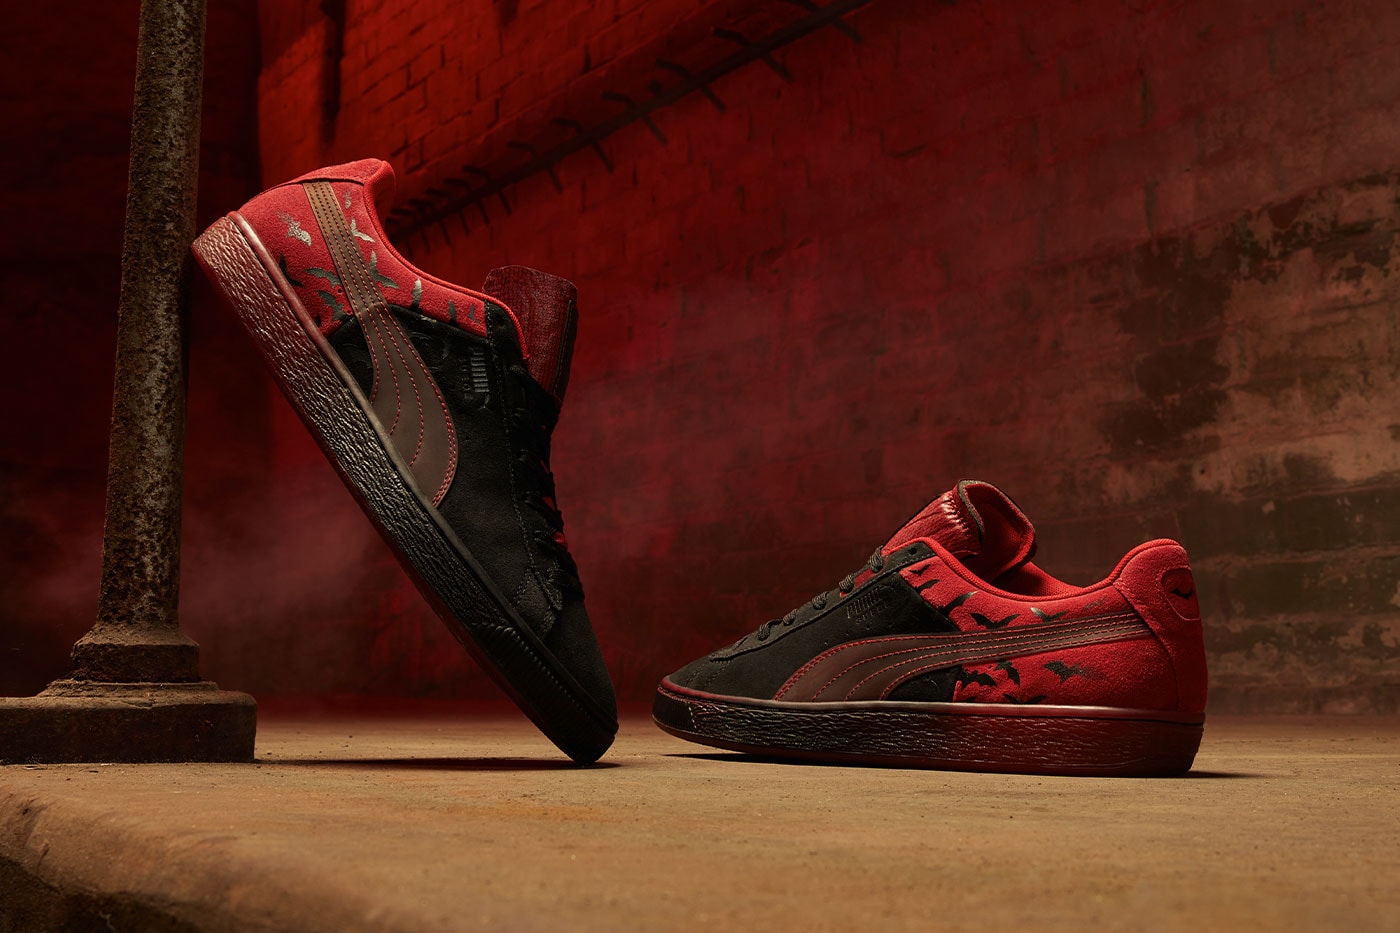 PUMA and DC Comics Join Forces for a Limited Edition Batman Collection robert pattinson warner bros. gotham city puma suede fierce 2 rs-x silhouette mayze court rider batman ultra future z 